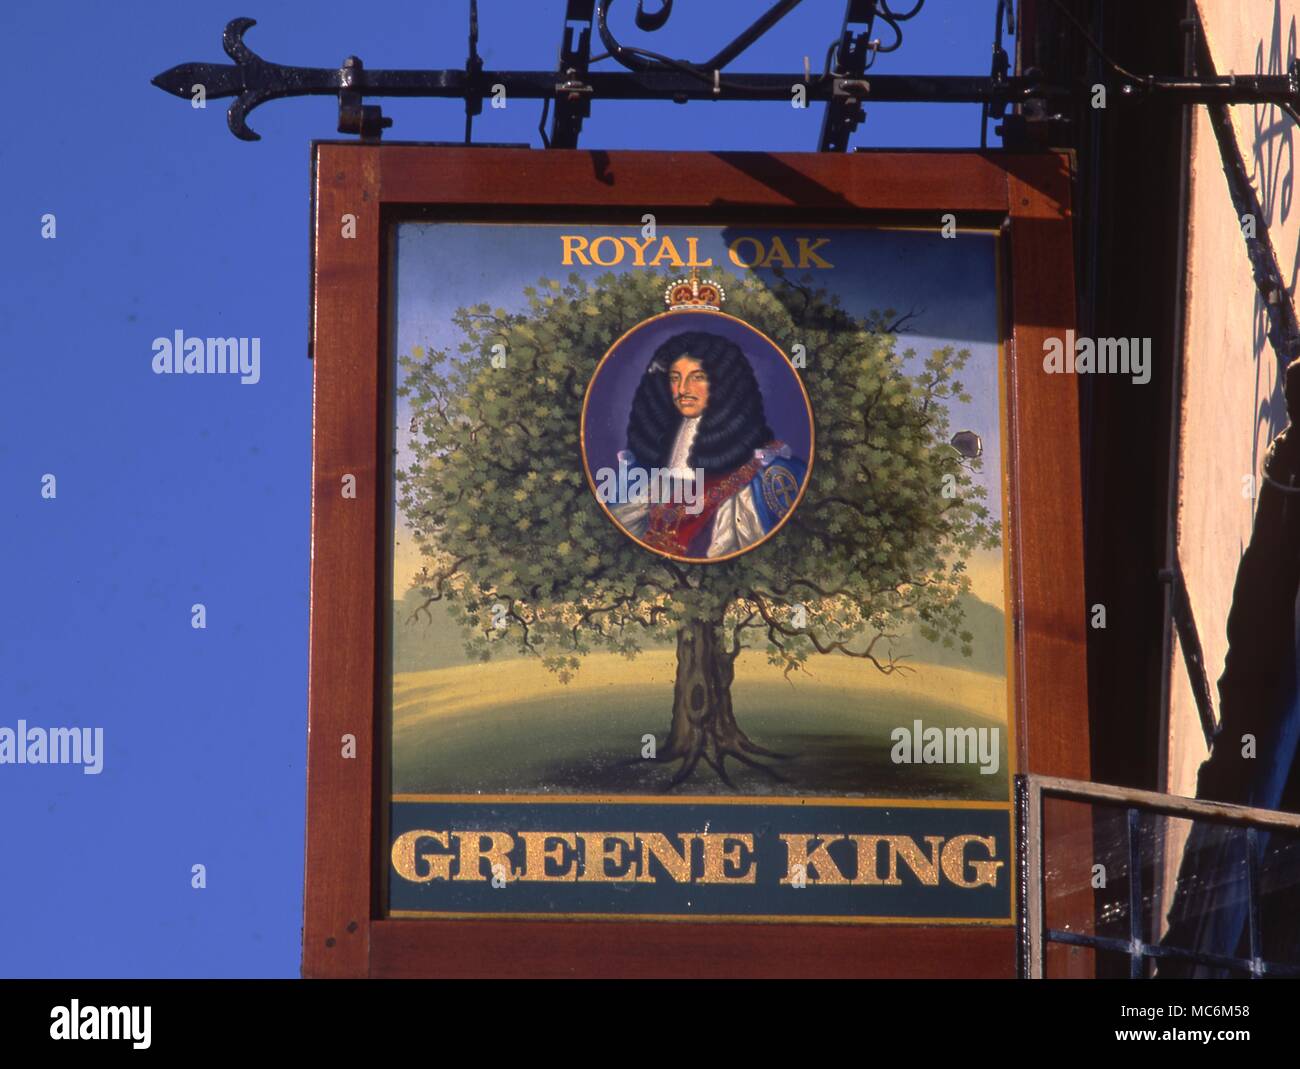 Inn sign of The Royal Oak. Pub sign for one of the Greene King houses. Stock Photo